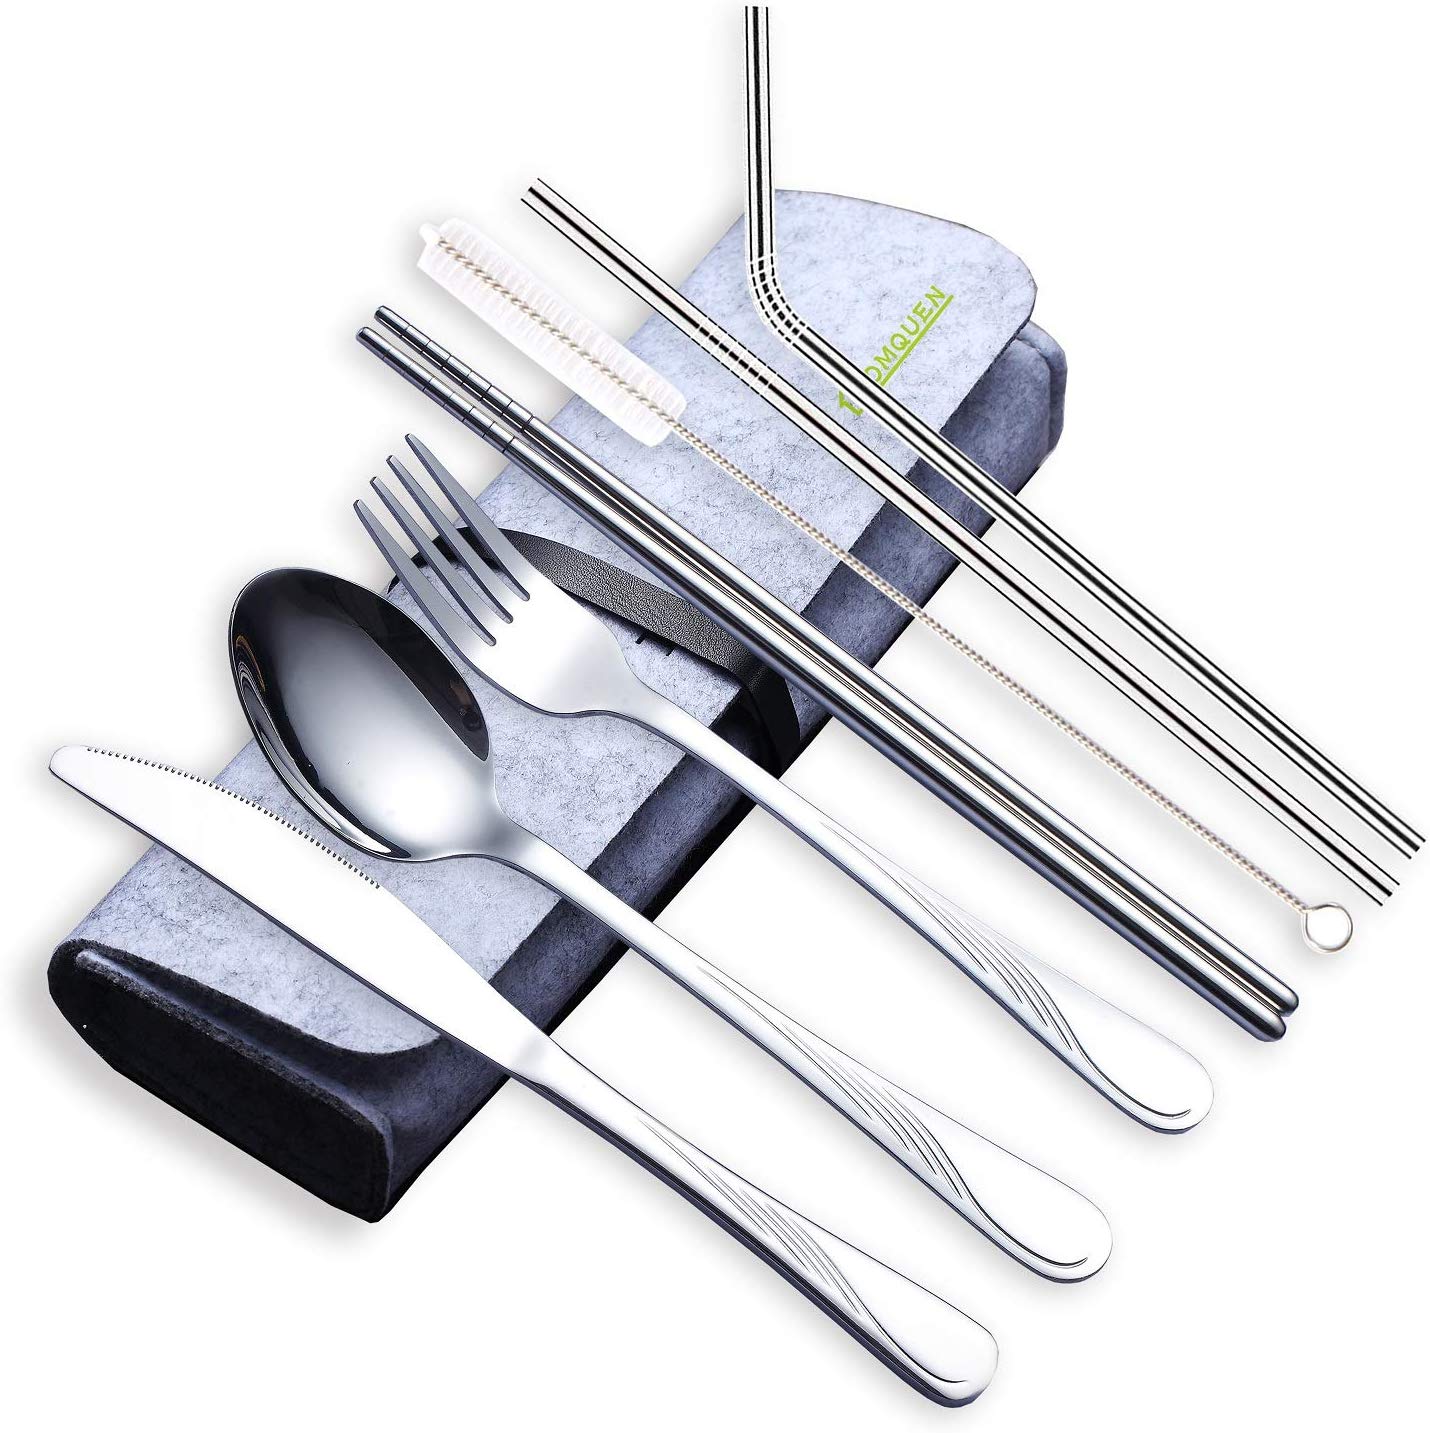 Details about   Protable Travel Collapsible Chopsticks Fork Spoon Stainless Steel Tableware LB 